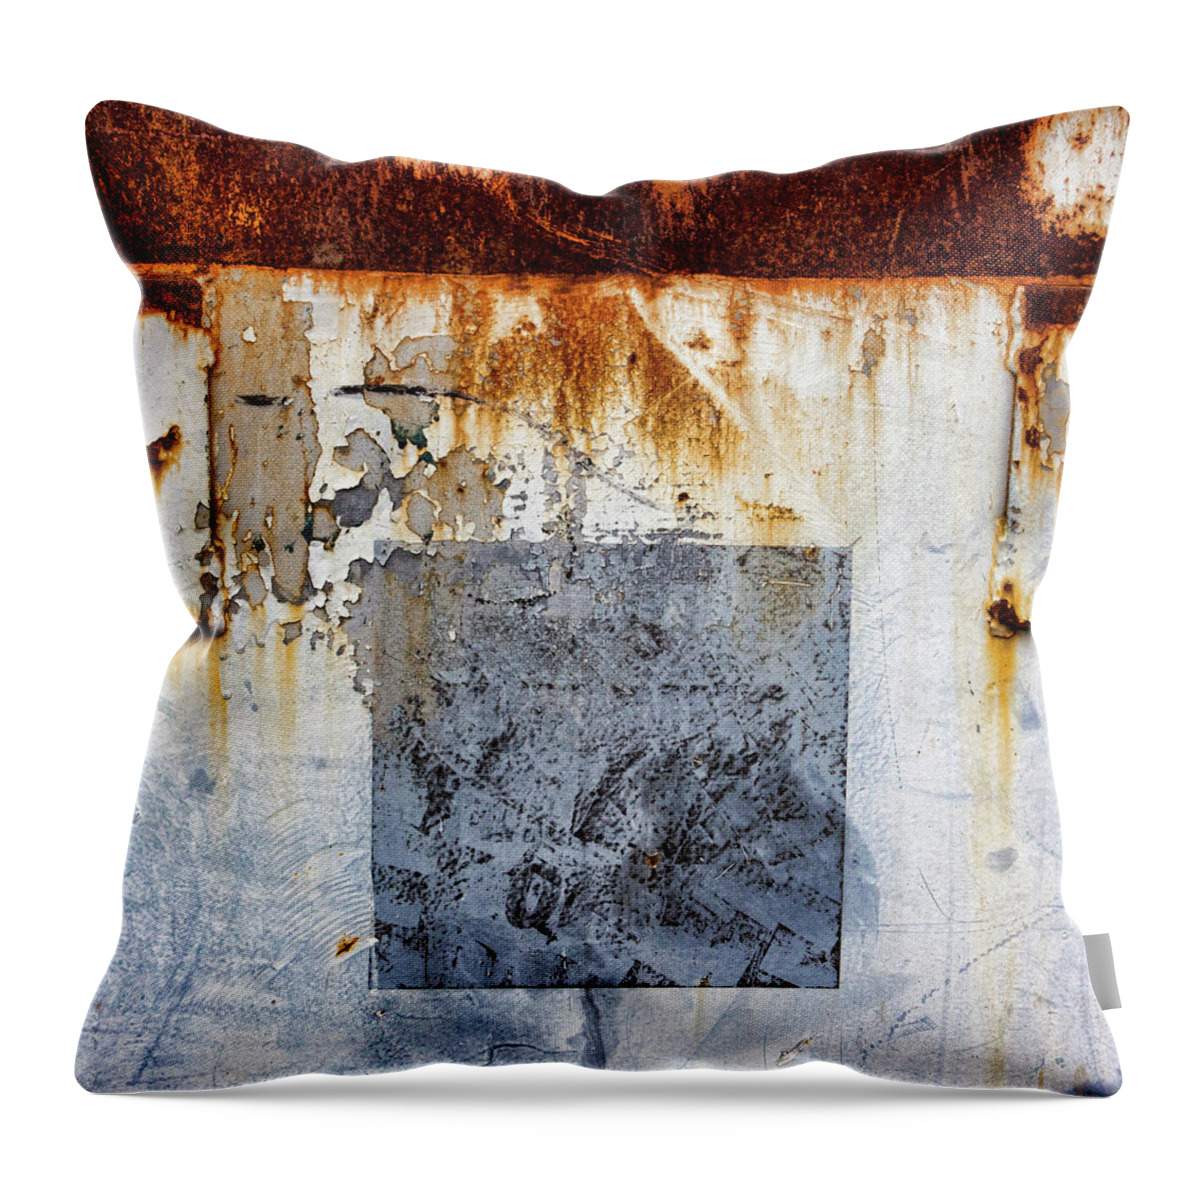 Rusty Patched Boat Throw Pillow featuring the photograph Rusty Patched Up Boat by Carol Leigh